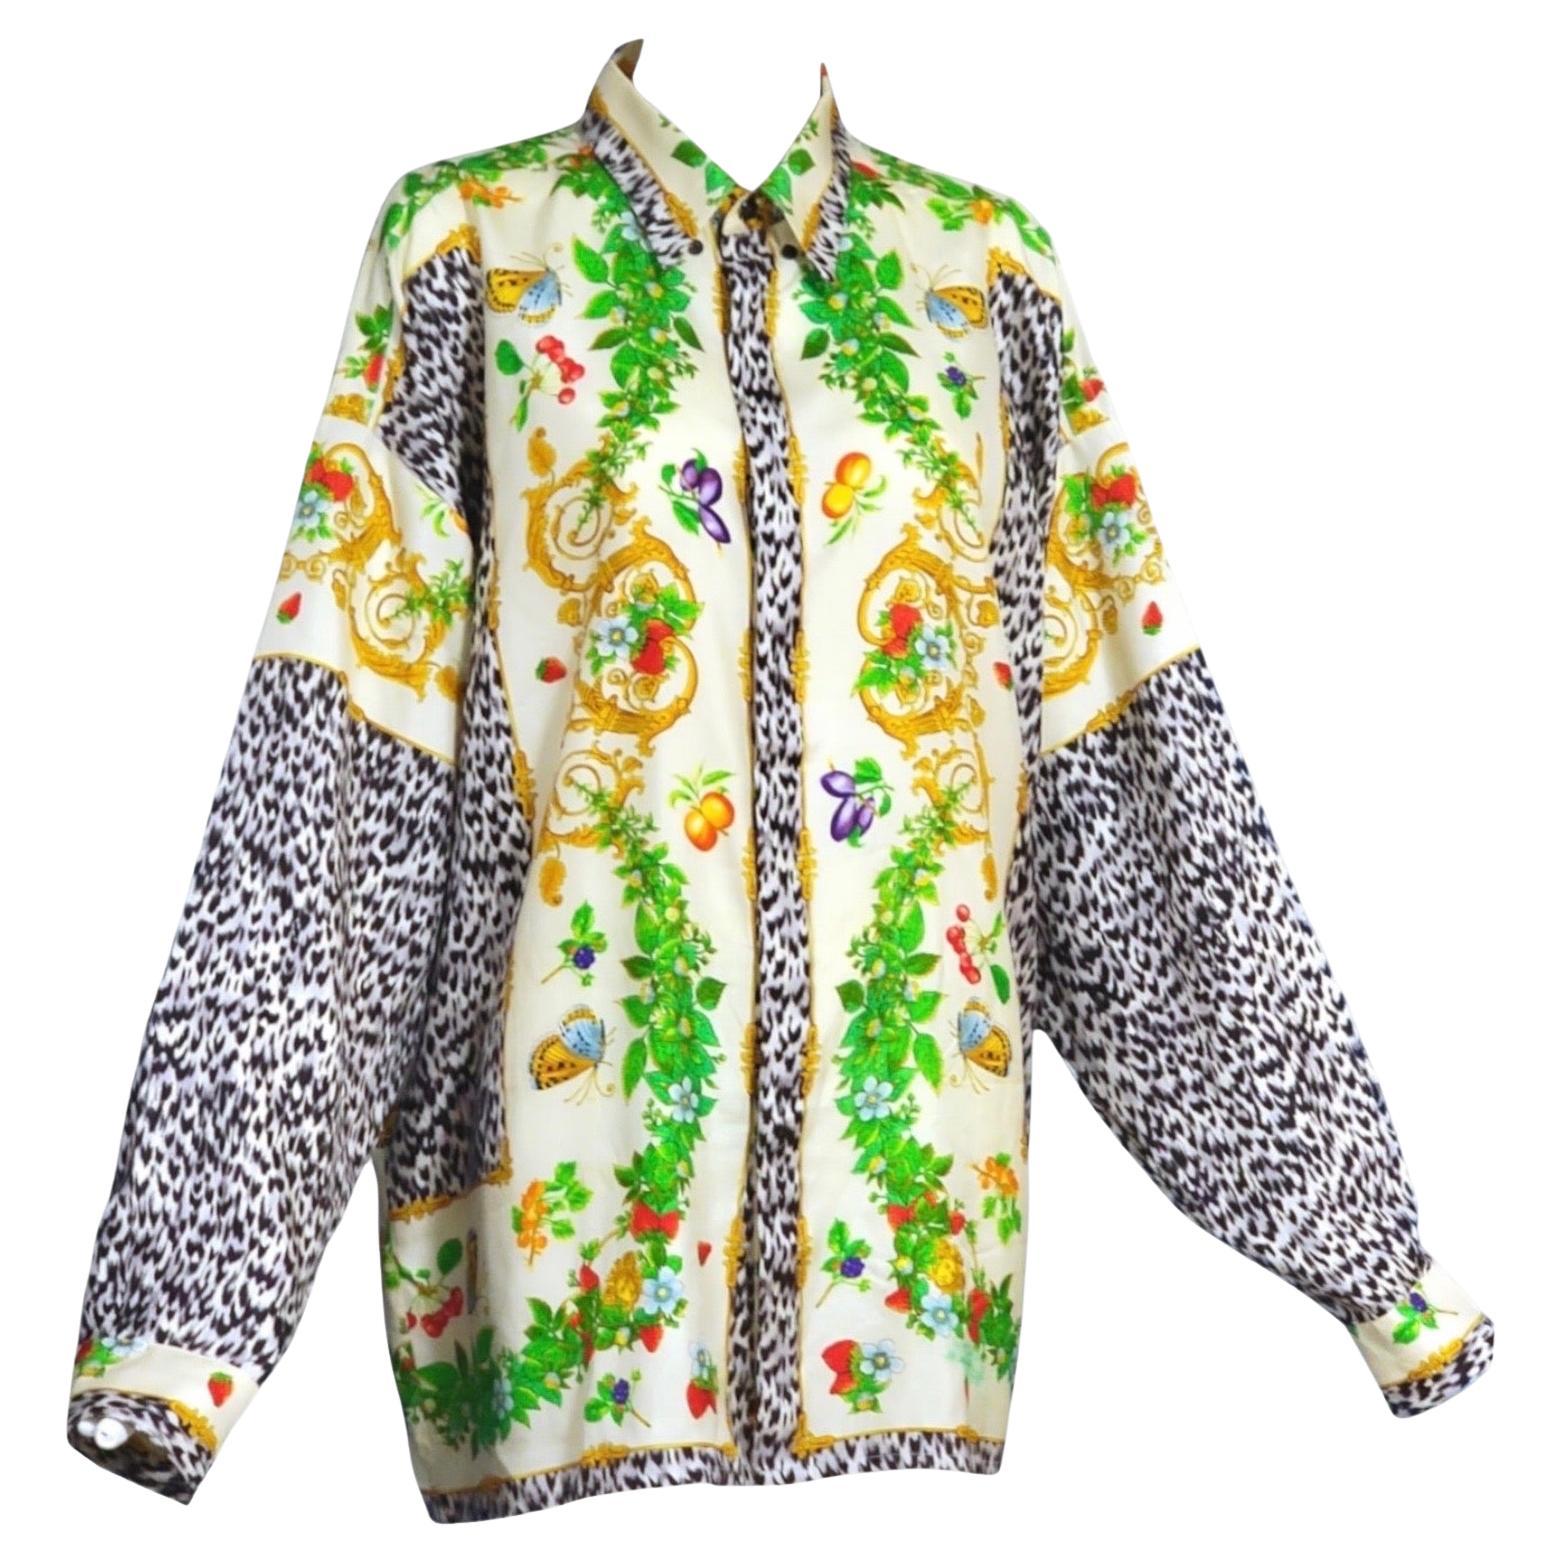 Gianni Versace Butterfly Silk Shirt from 1995.

This shirt is the leopard with butterflies print from 1995 depicting multi colored butterfly motifs along with fruits, medusa, leopard and barocco designs throughout.

Condition: This silk shirt is in